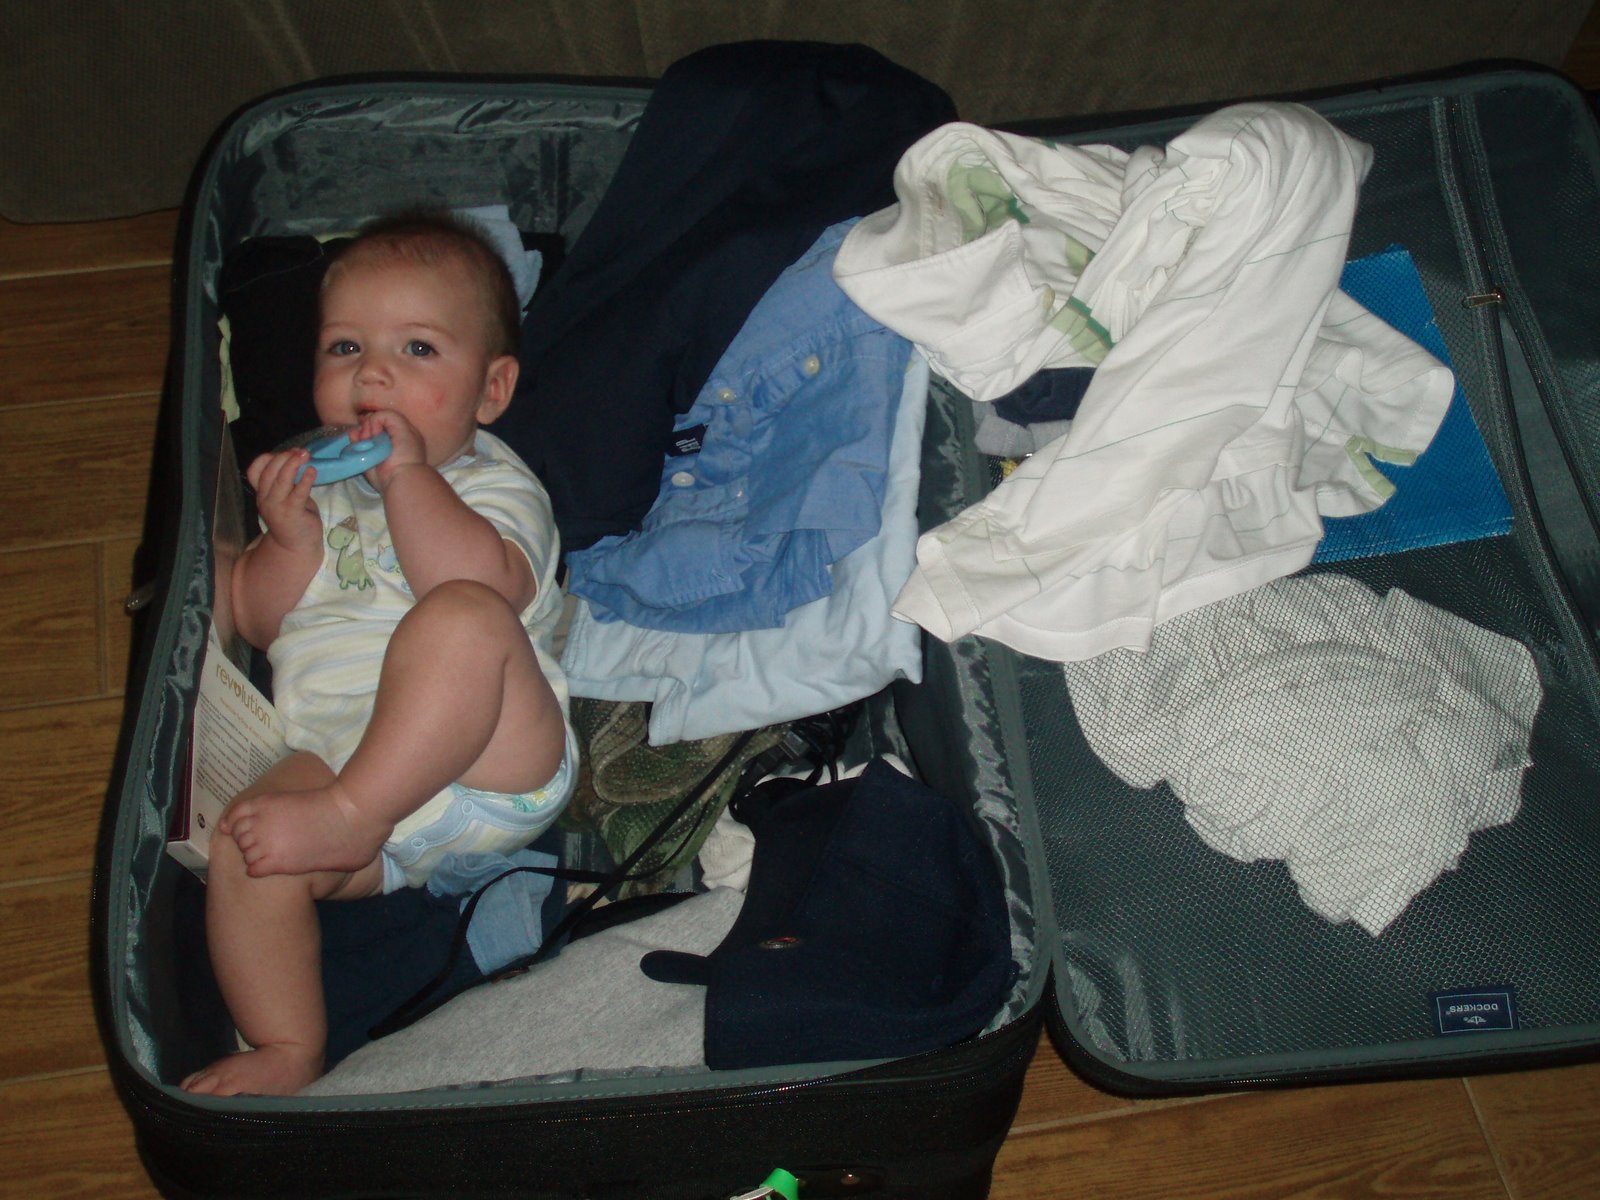 [daddy's+suitcase+072808.JPG]